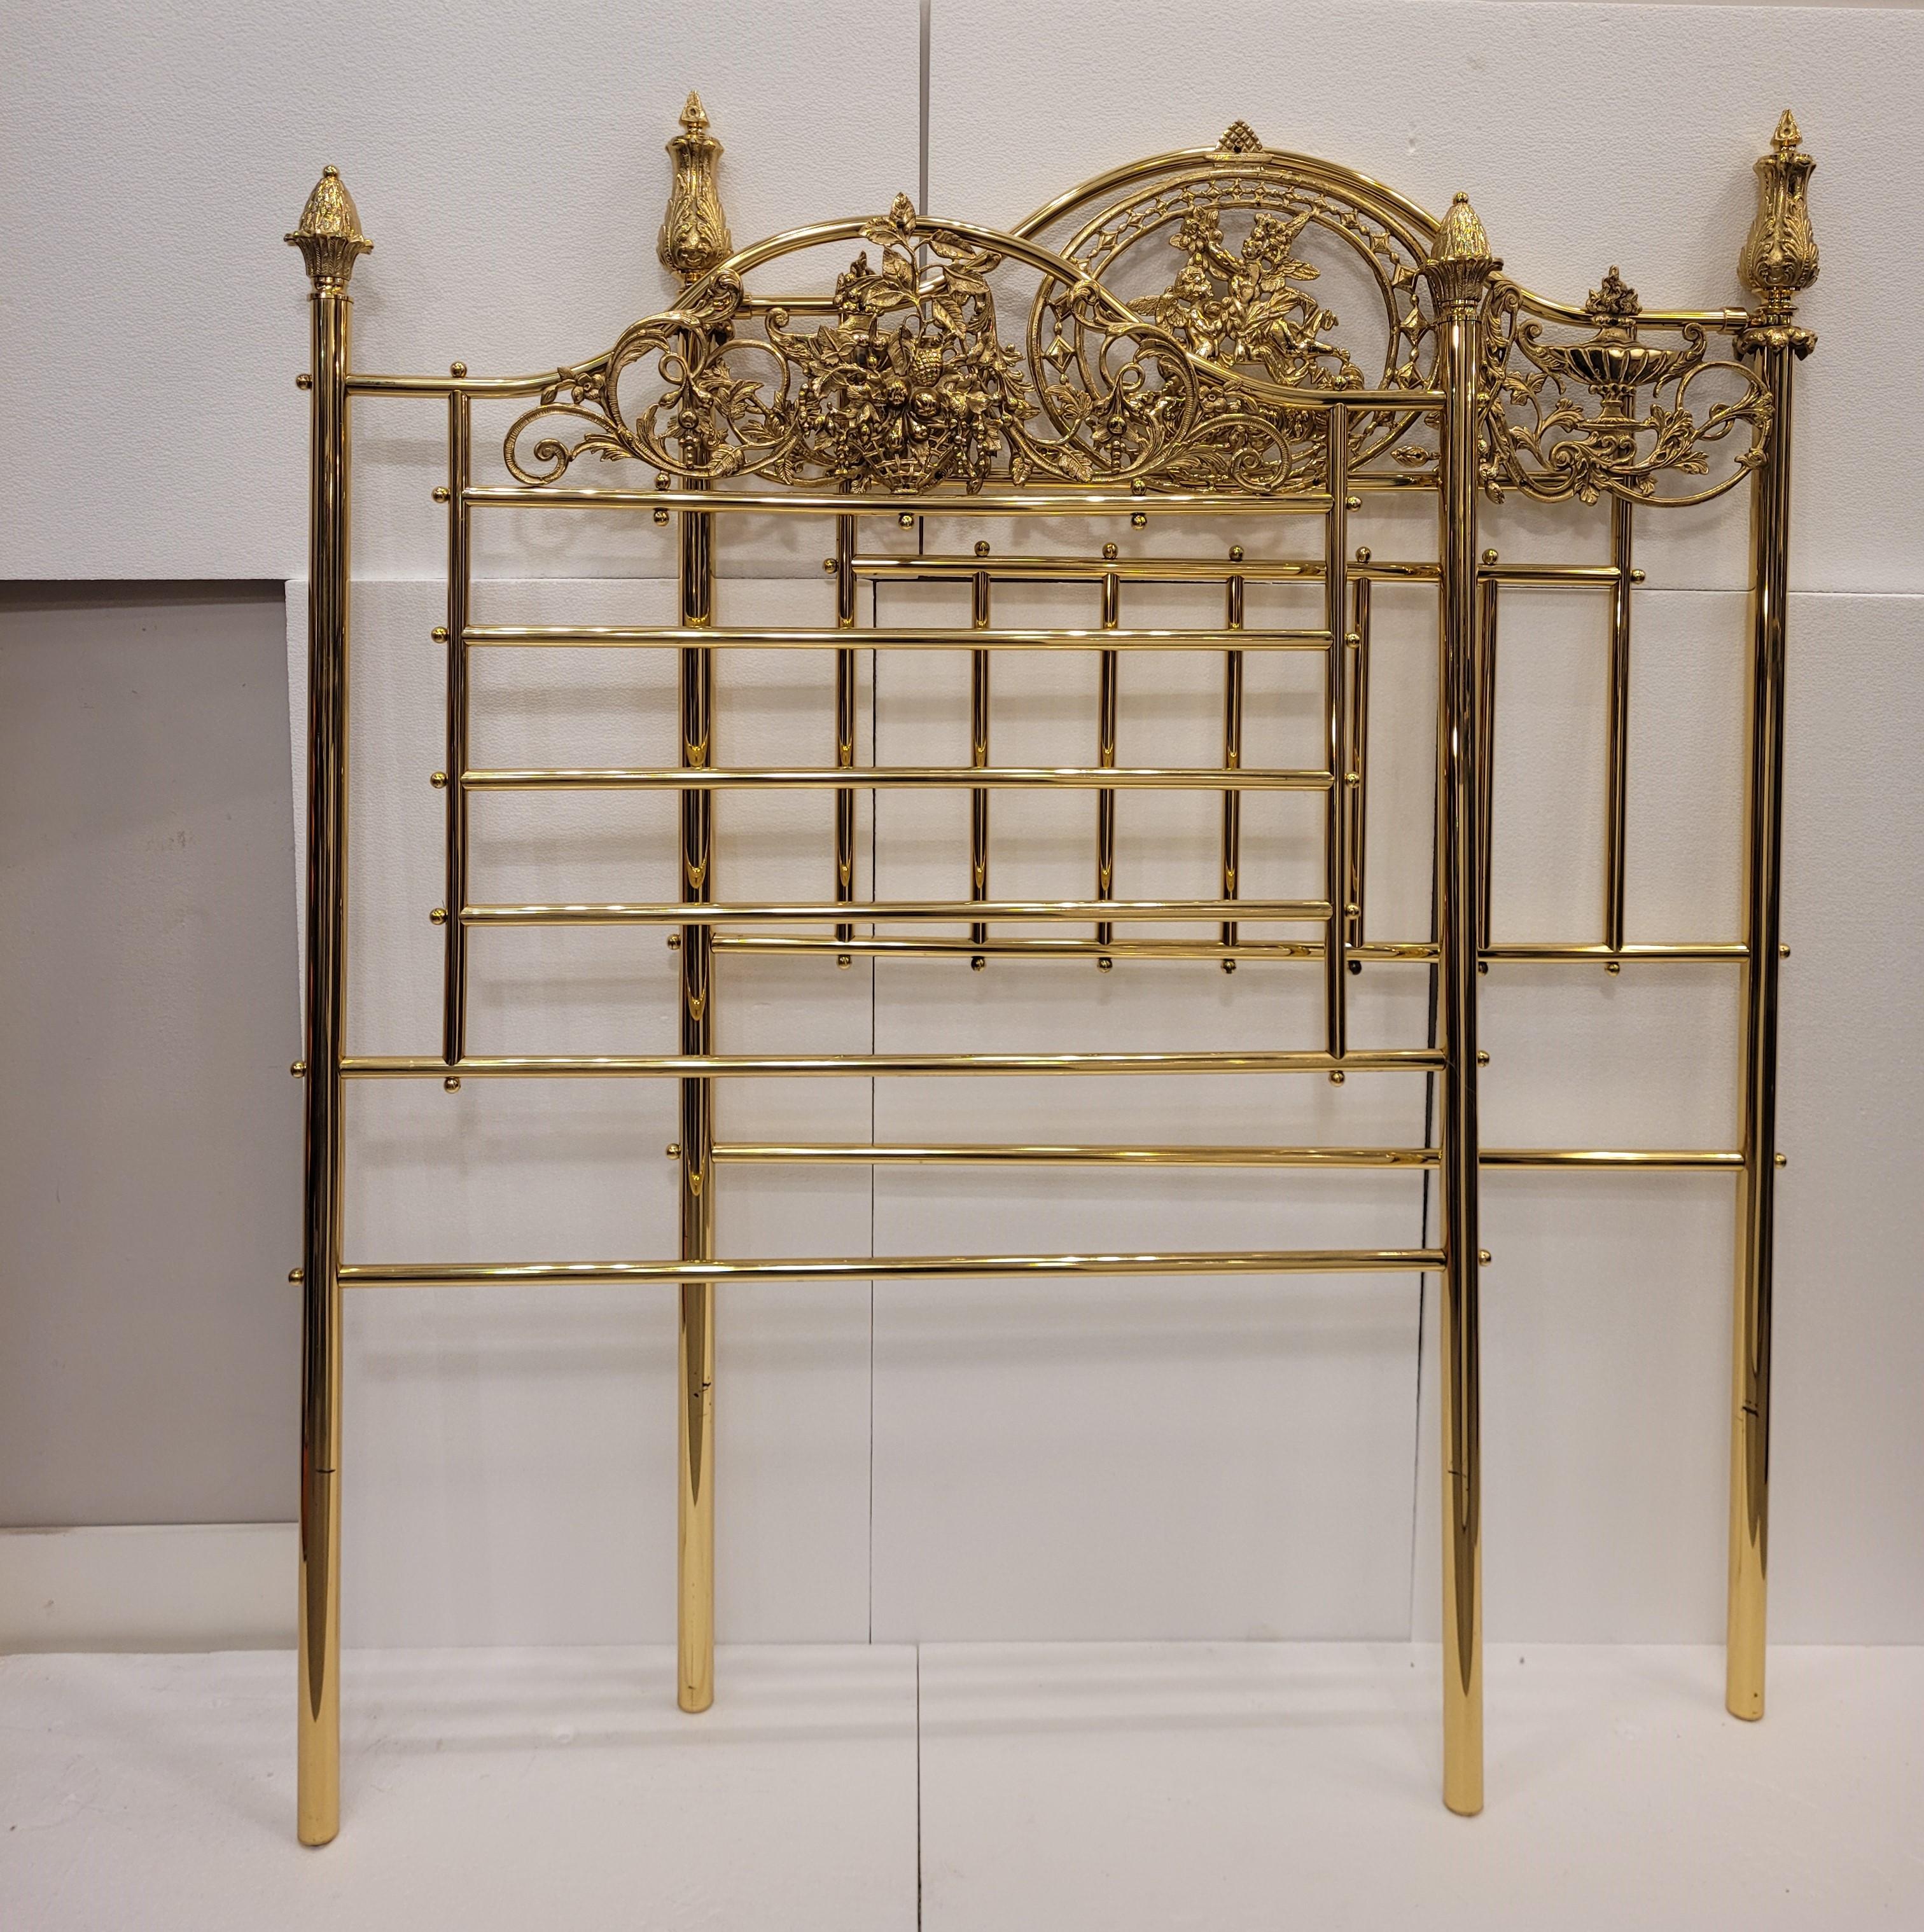 Beautiful French bed headboards in gilt bronze, Napoleon III.
Measurements 140 cm tall and 134 cm the other,
 7 cm wide and 95 cm wide both, they are headboards to hang on the wall, with small differences in the decorative motifs of the pilasters